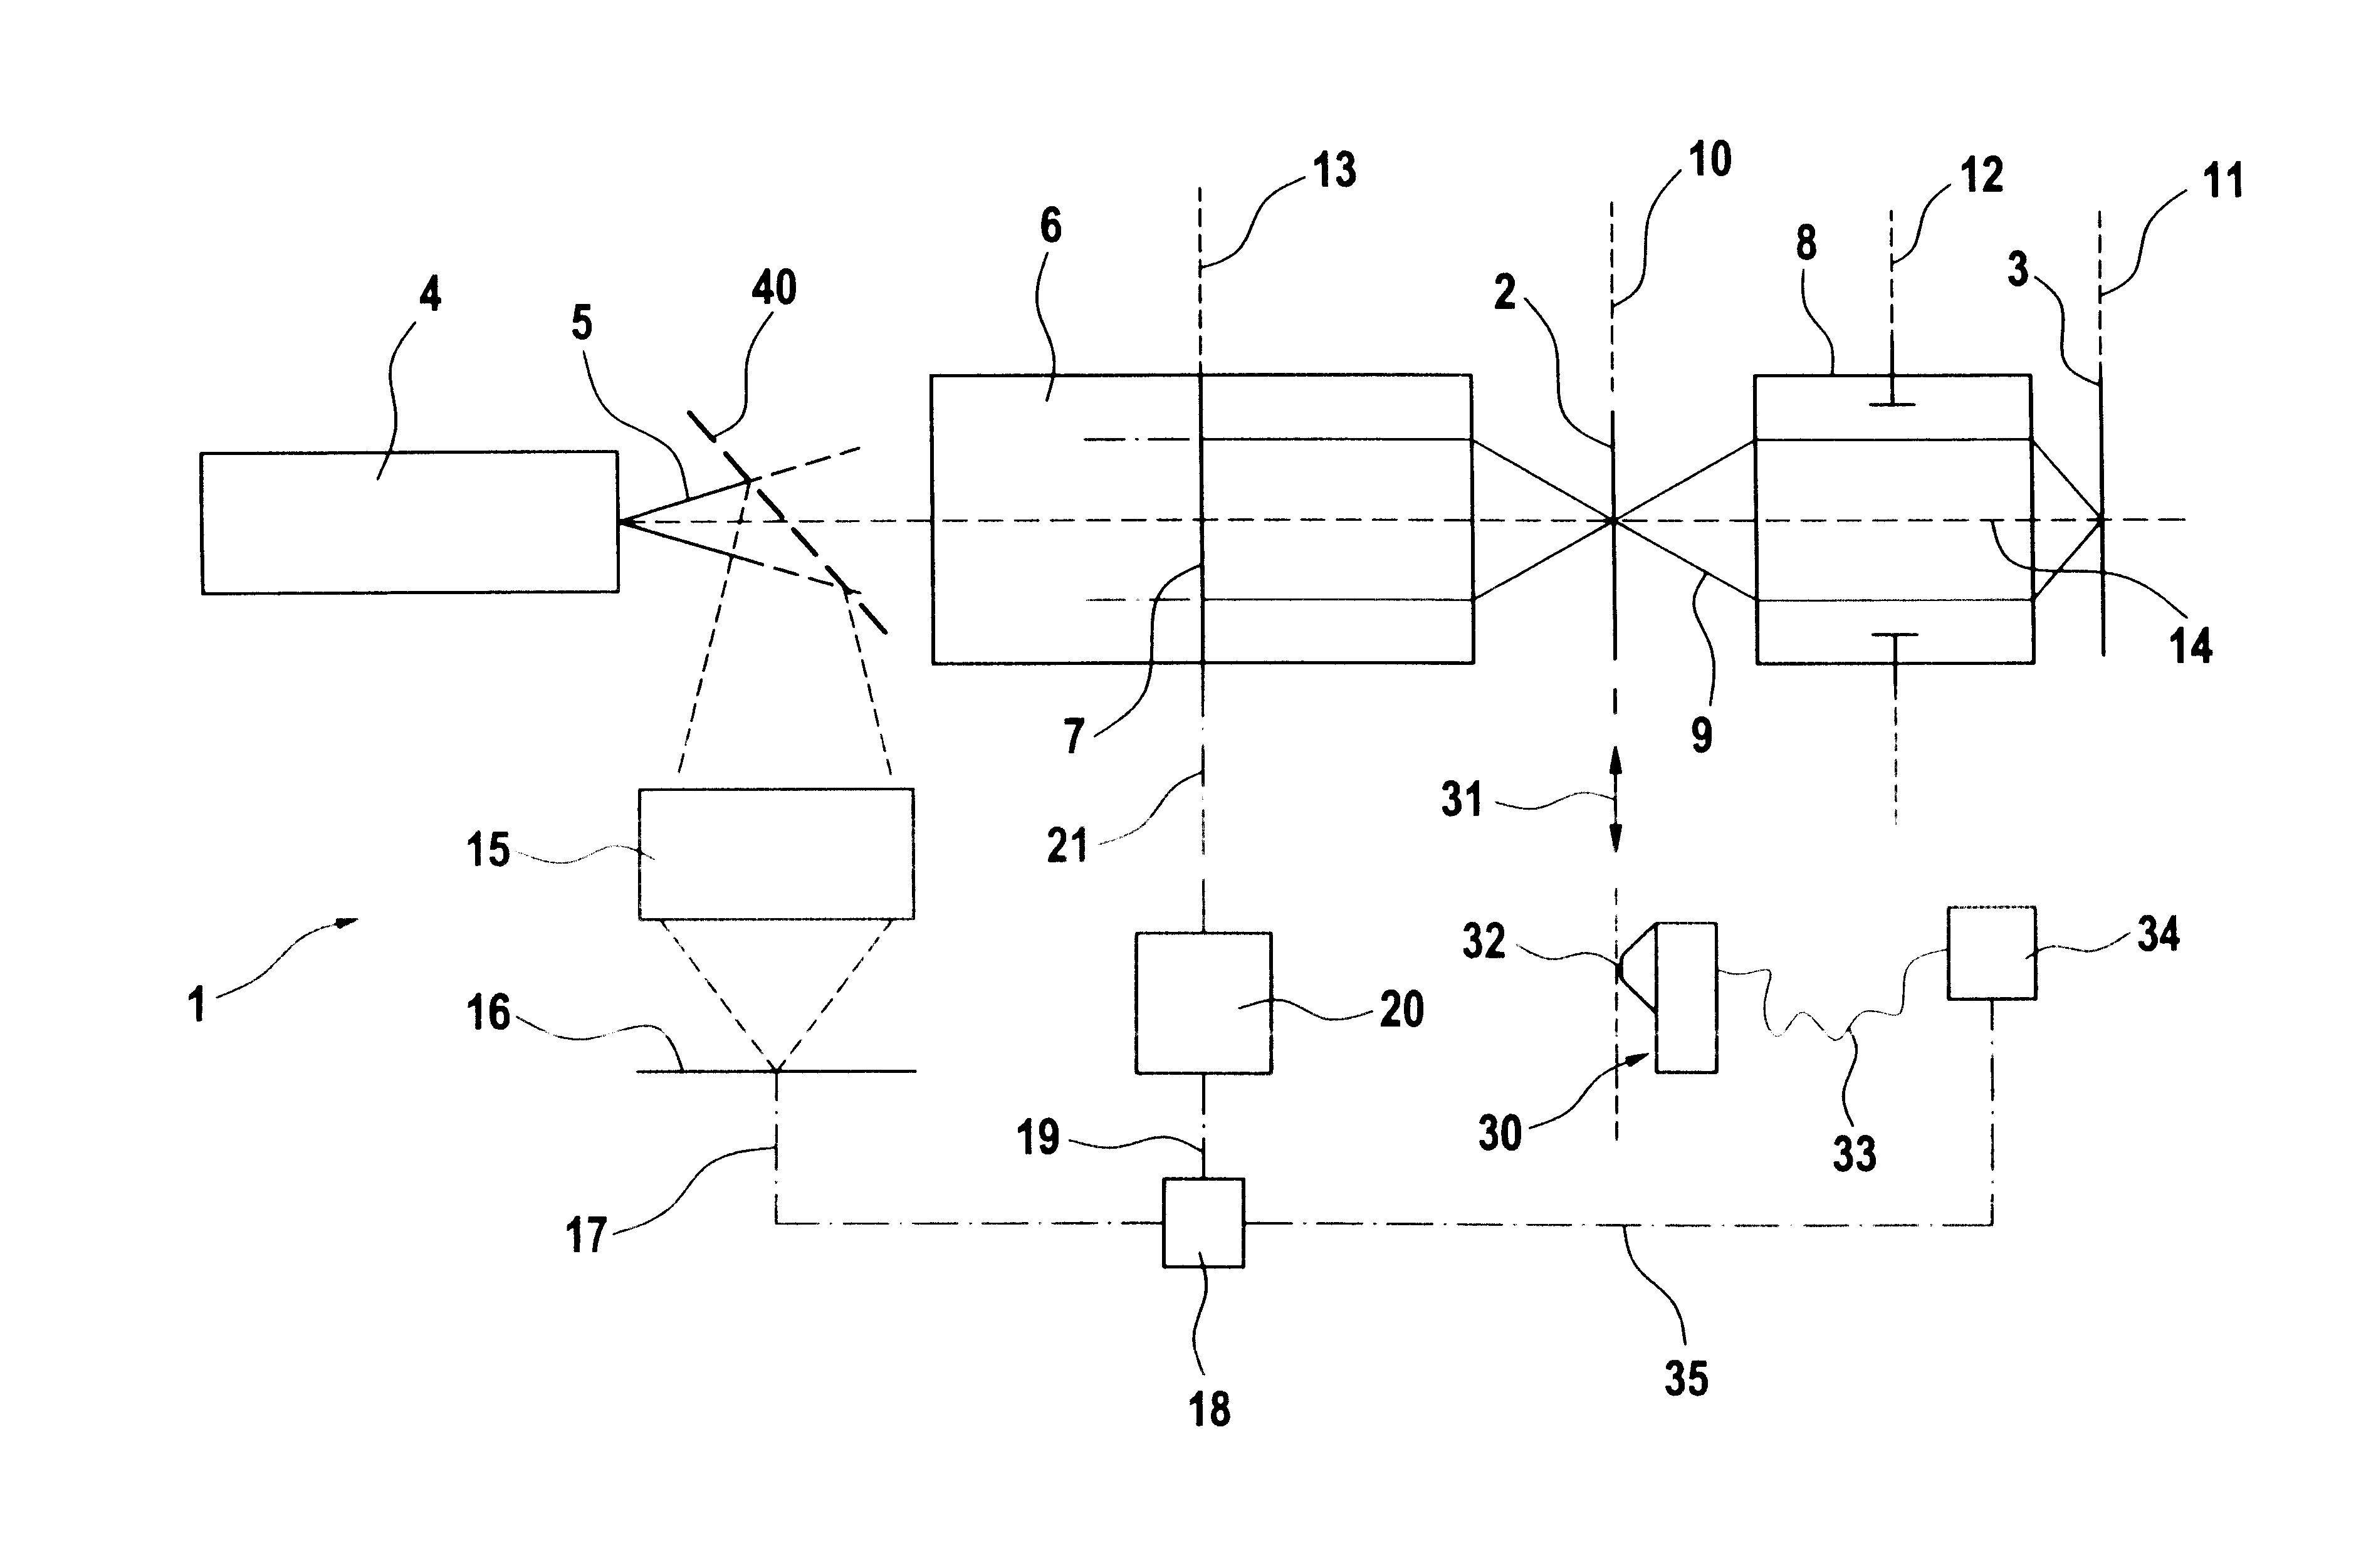 Projection exposure device